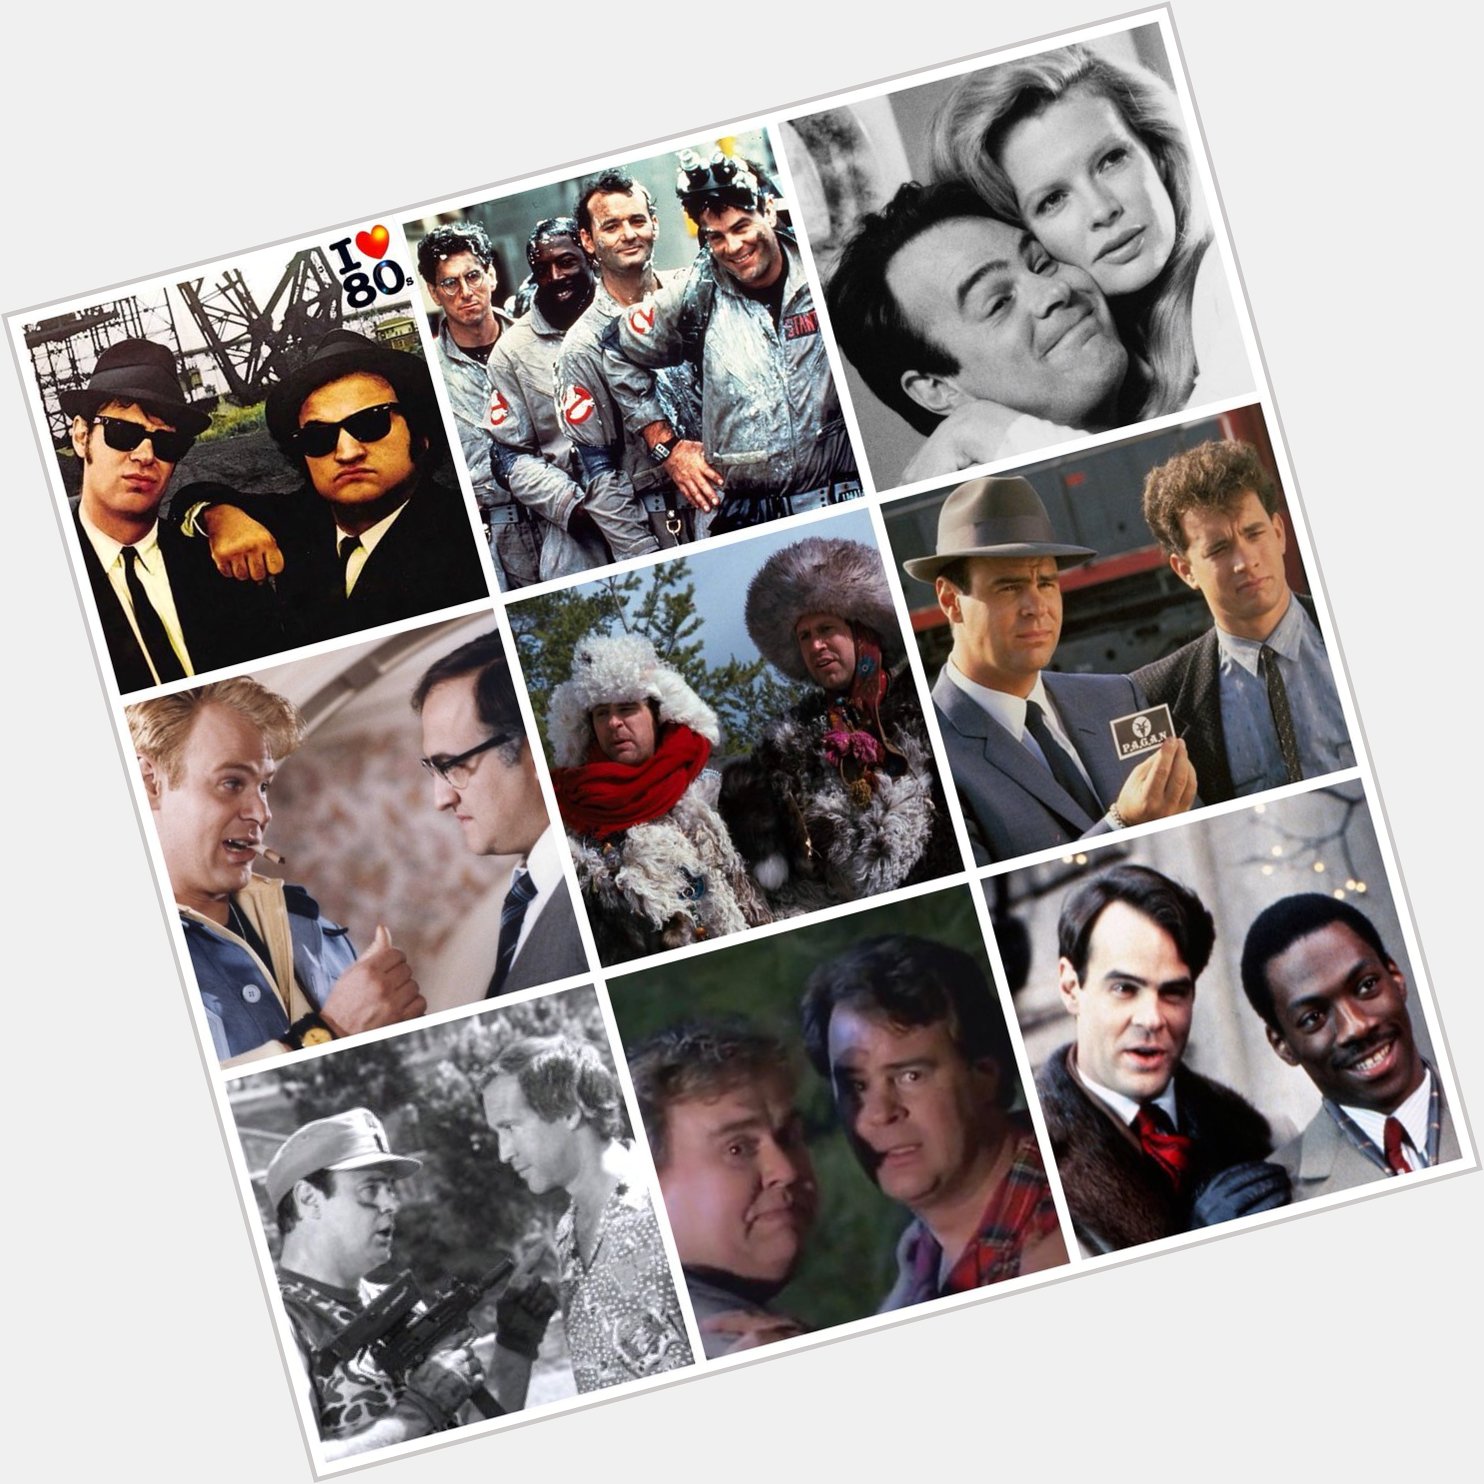 Happy 67th Birthday today to Dan Aykroyd who was born on 1st July 1952.  Which is your favourite Dan Aykroyd movie? 